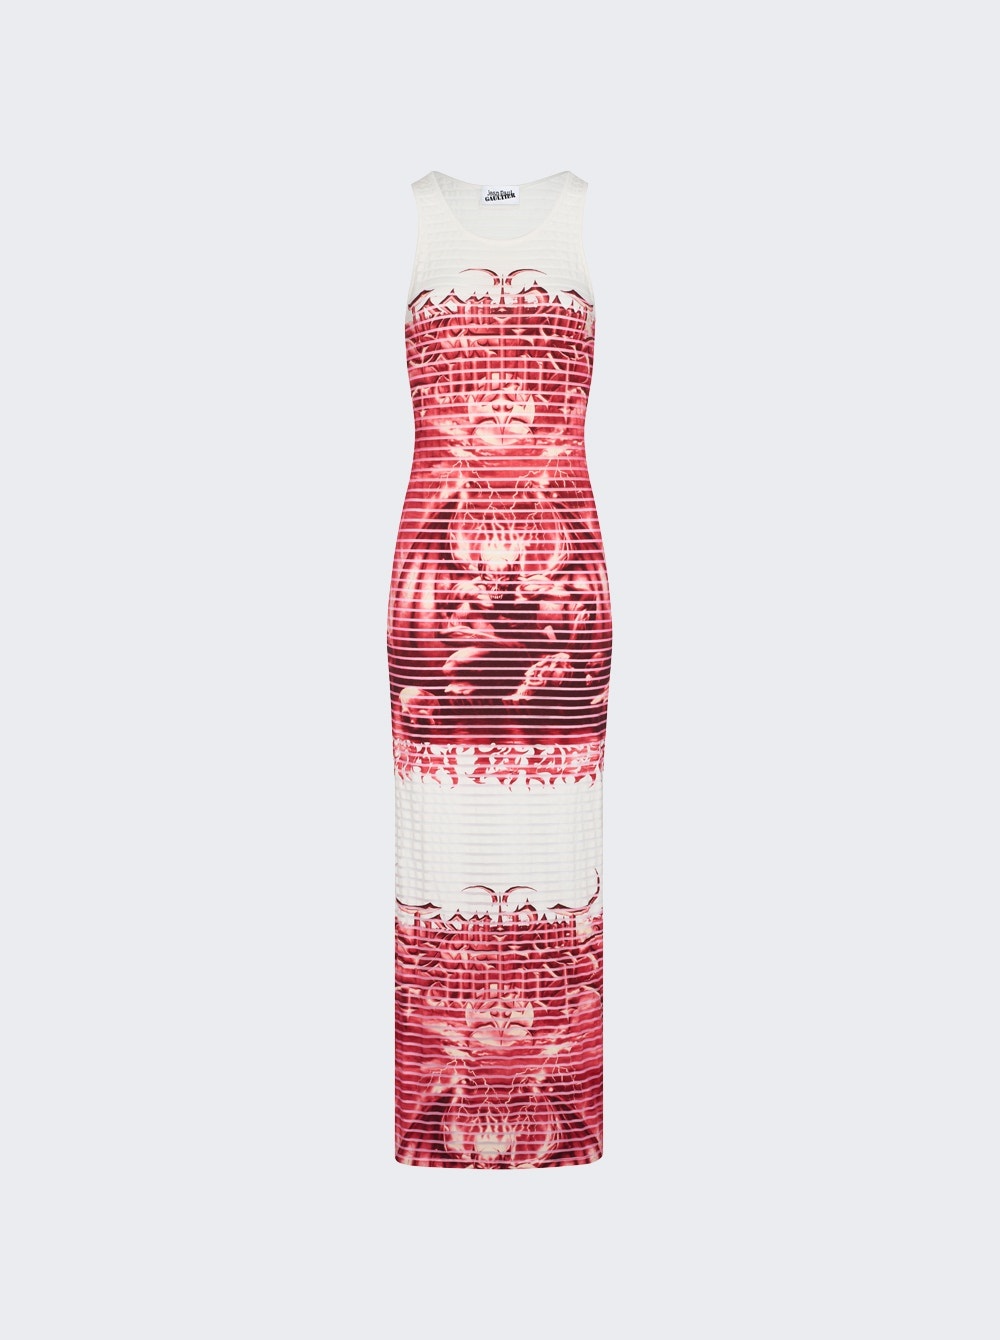 TrÈs Gaultier #1 Diablo Printed Dress White And Red - 1